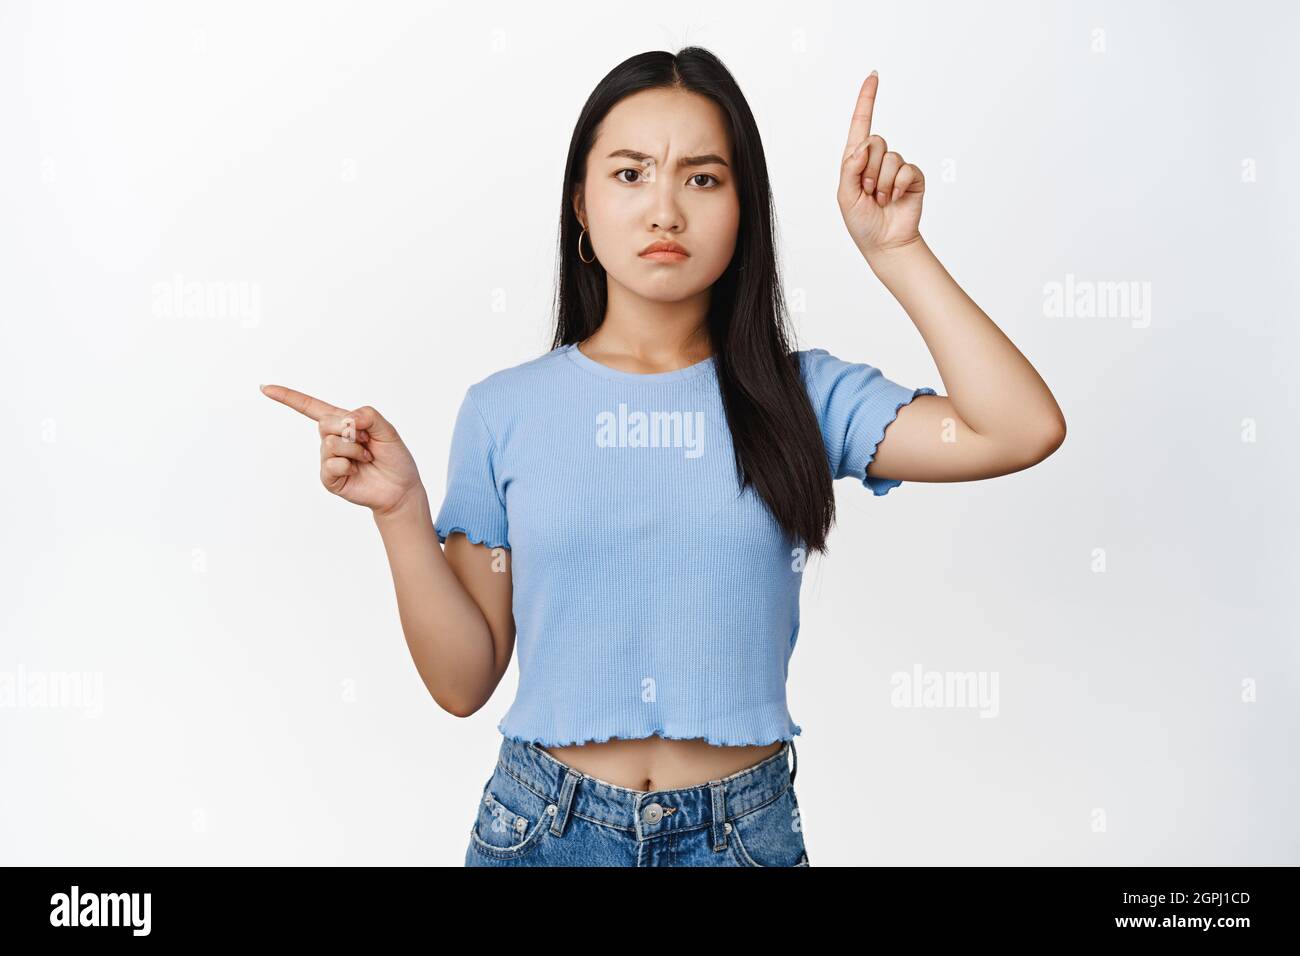 Angry teen asian girl pointing sideways, sulking and frowning upset, complaining at something, standing in blue t-shirt over white background Stock Photo